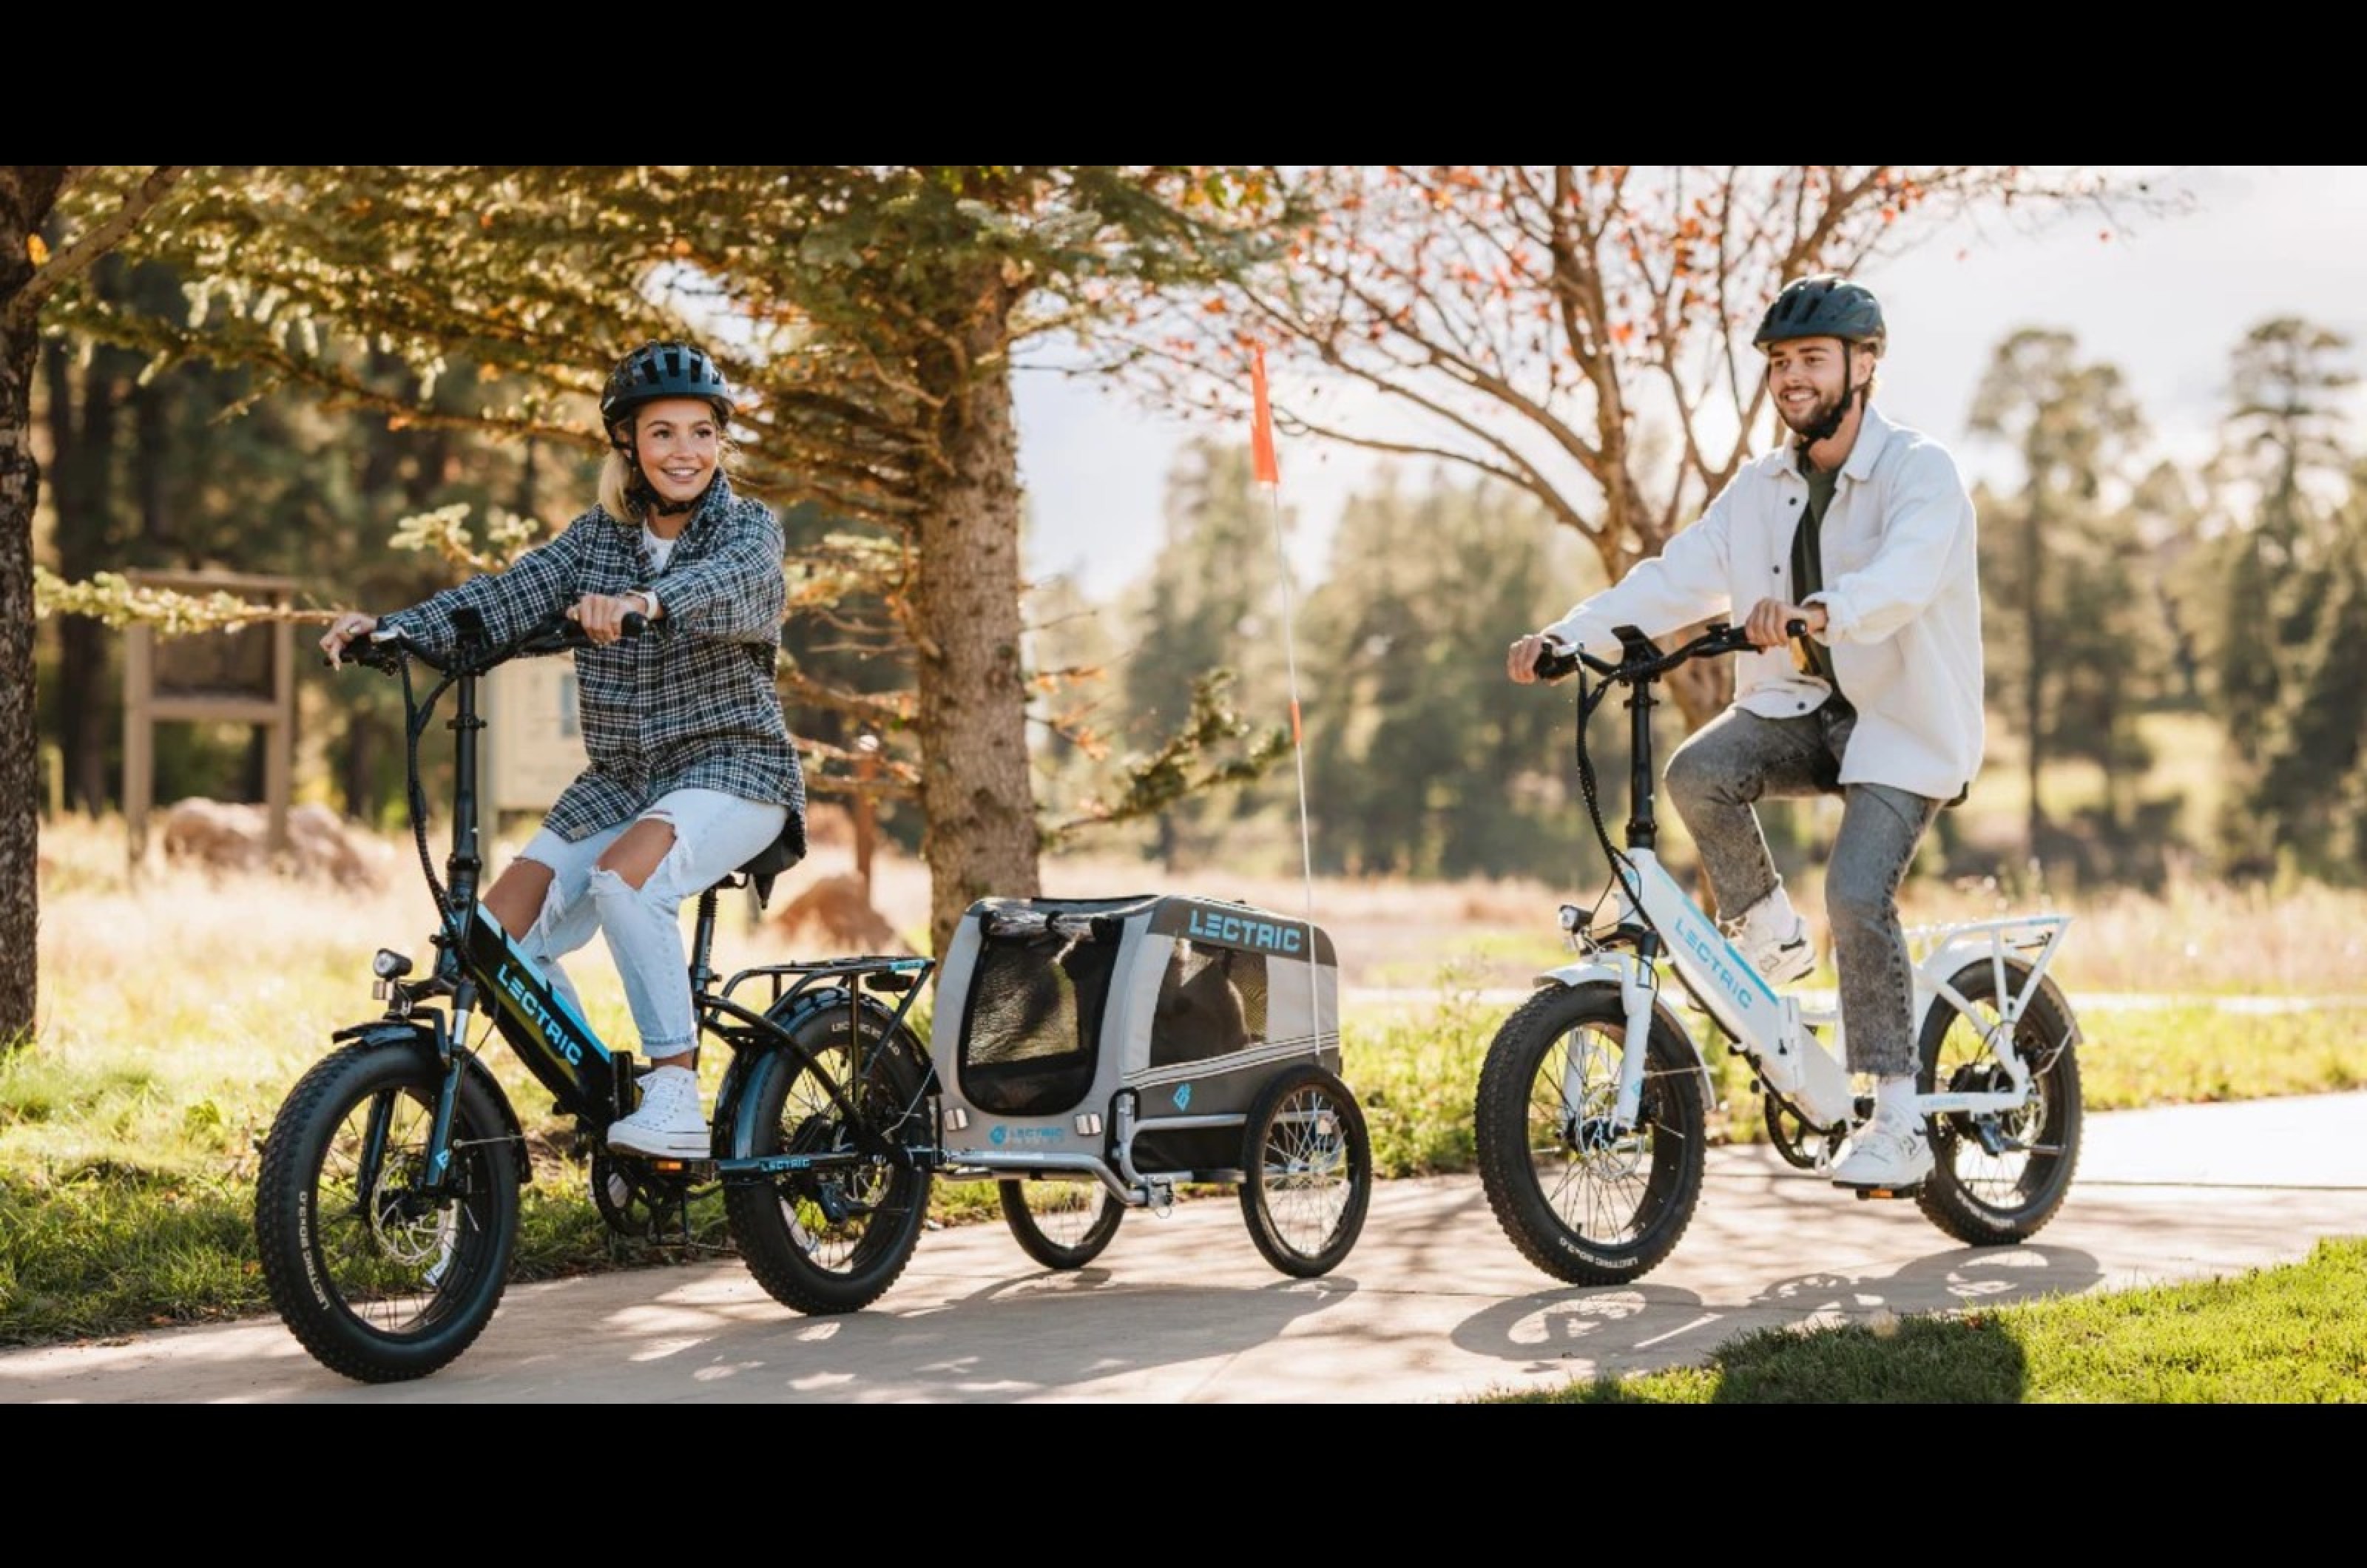 <p>The XPremium has seven gears, an 800W motor and two 47V batteries, providing a range of 100 miles while using the pedal assist function, and a top speed of 28mph. It folds in two, allowing for easy storage and is equipped with a rack capable of carrying 25kg. While the battery is removable, it comes fitted with an external charging port and takes around 4-6 hours to charge. Prices start from £1325 or $1799 for those in the US.</p>